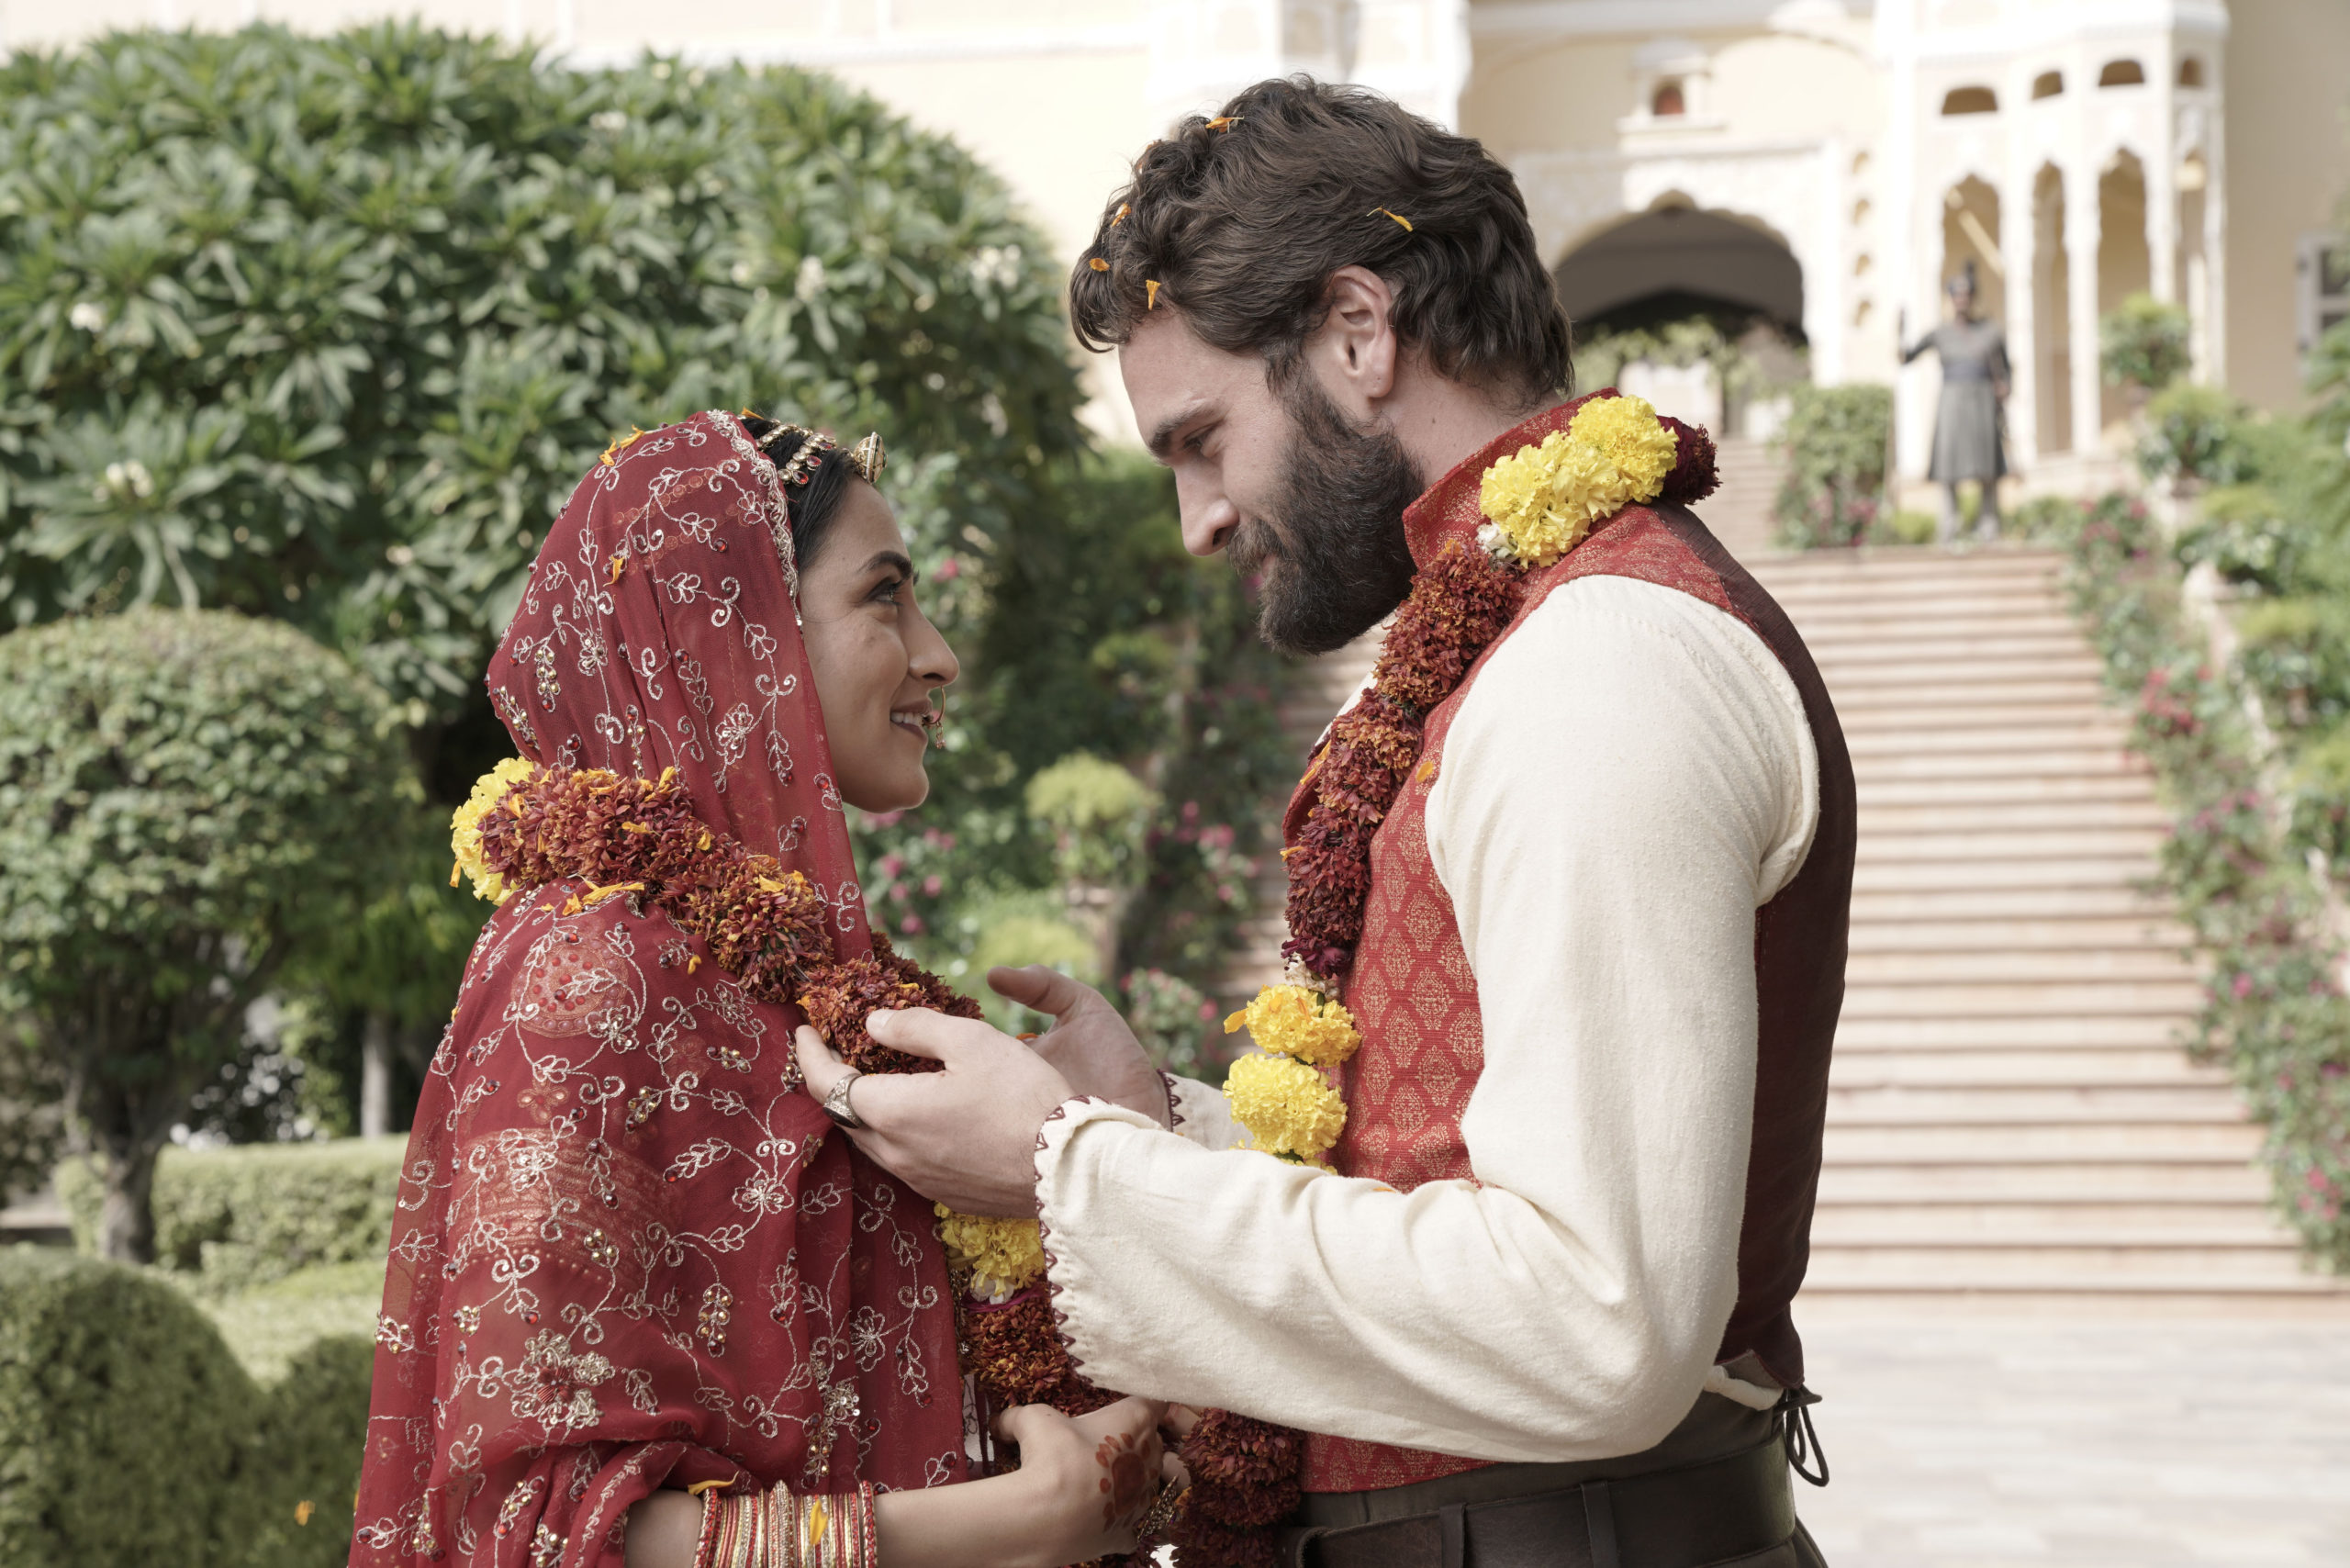 MASTERPIECE
“Beecham House"
Sunday, March 1 on PBS Passport

Episode Four
Just when John thinks all is going well, Chandrika visits his room late at night, witnessed by Violet who tells all to his mother. When Margaret learns of this, she makes clear her intentions to leave Delhi. John realises he has no choice but to reveal the truth about his past and the baby’s identity knowing that this could risk the safety of his child.

Shown from left to right: Saiyami Kher as Khamlavati and Tom Bateman as John Beecham

For editorial use only.

Courtesy of MASTERPIECE